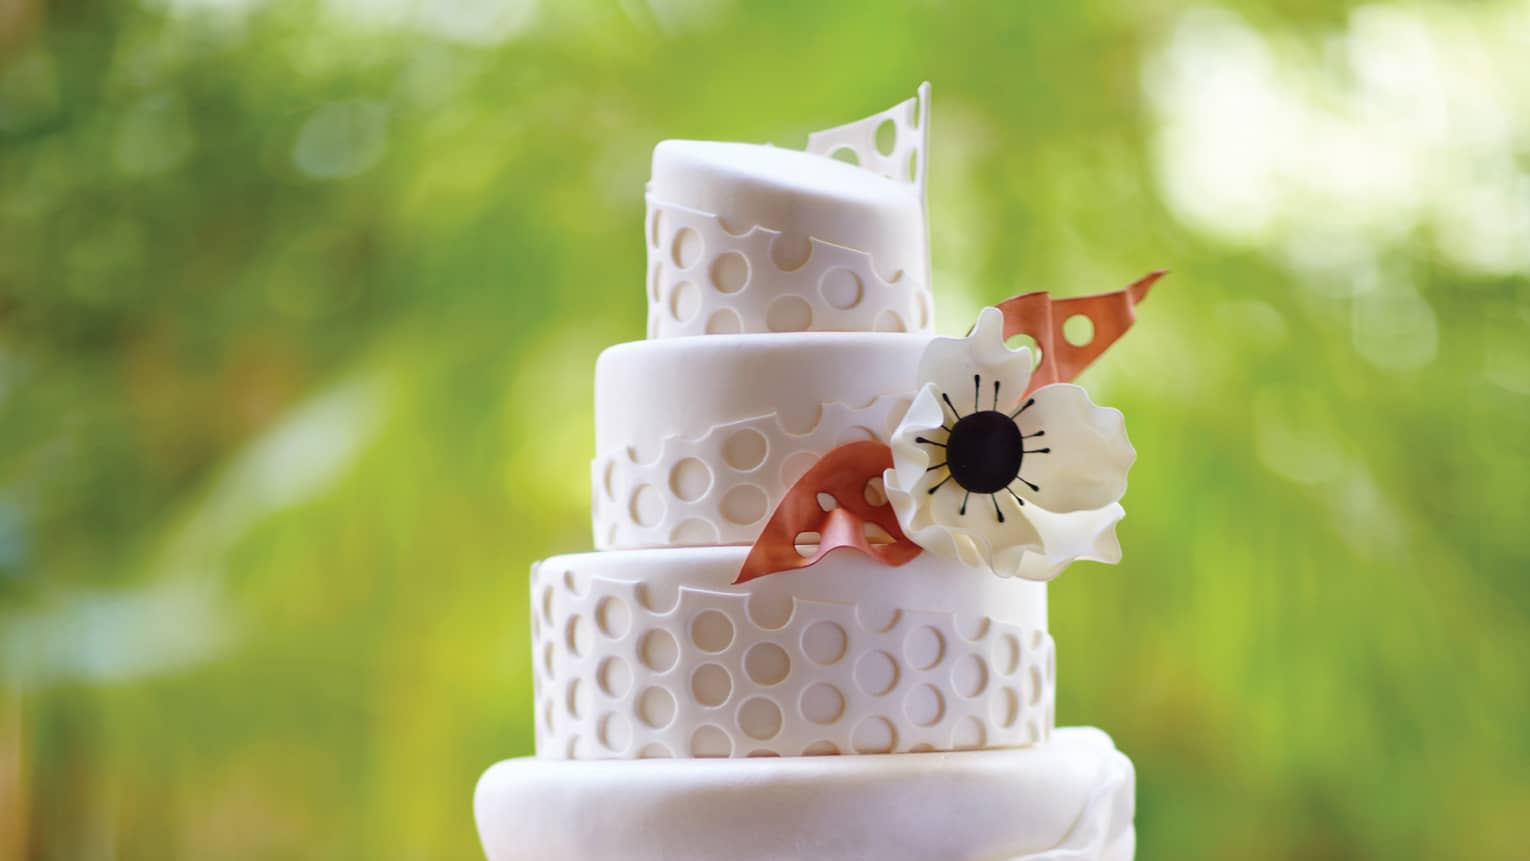 Small four tiered wedding cake decorated with fondant pattern, flower